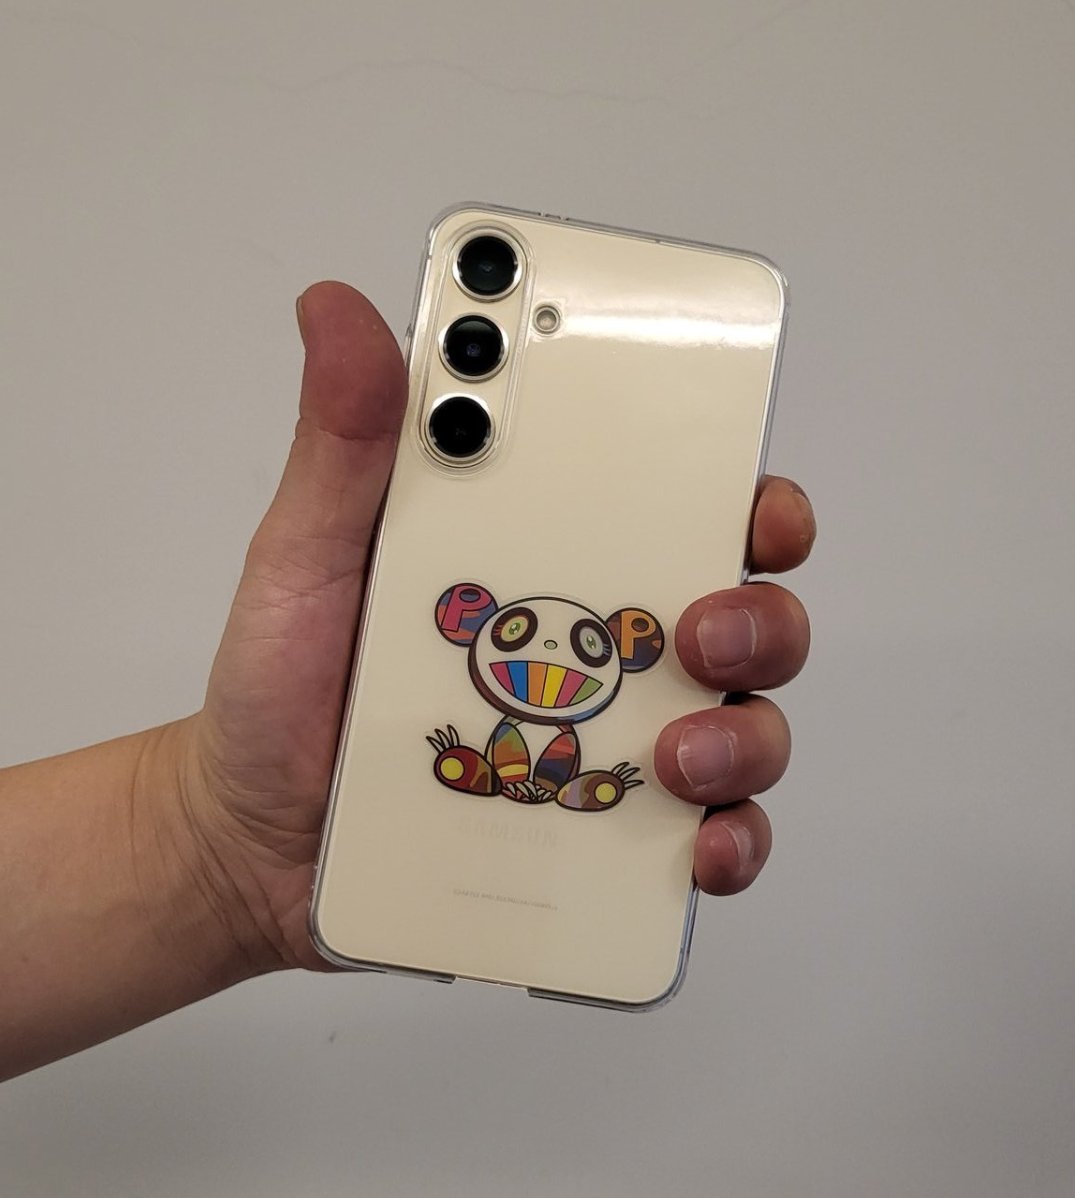 I smashed my old phone and got a replacement plus a @takashipom Panda sticker to match.🐻